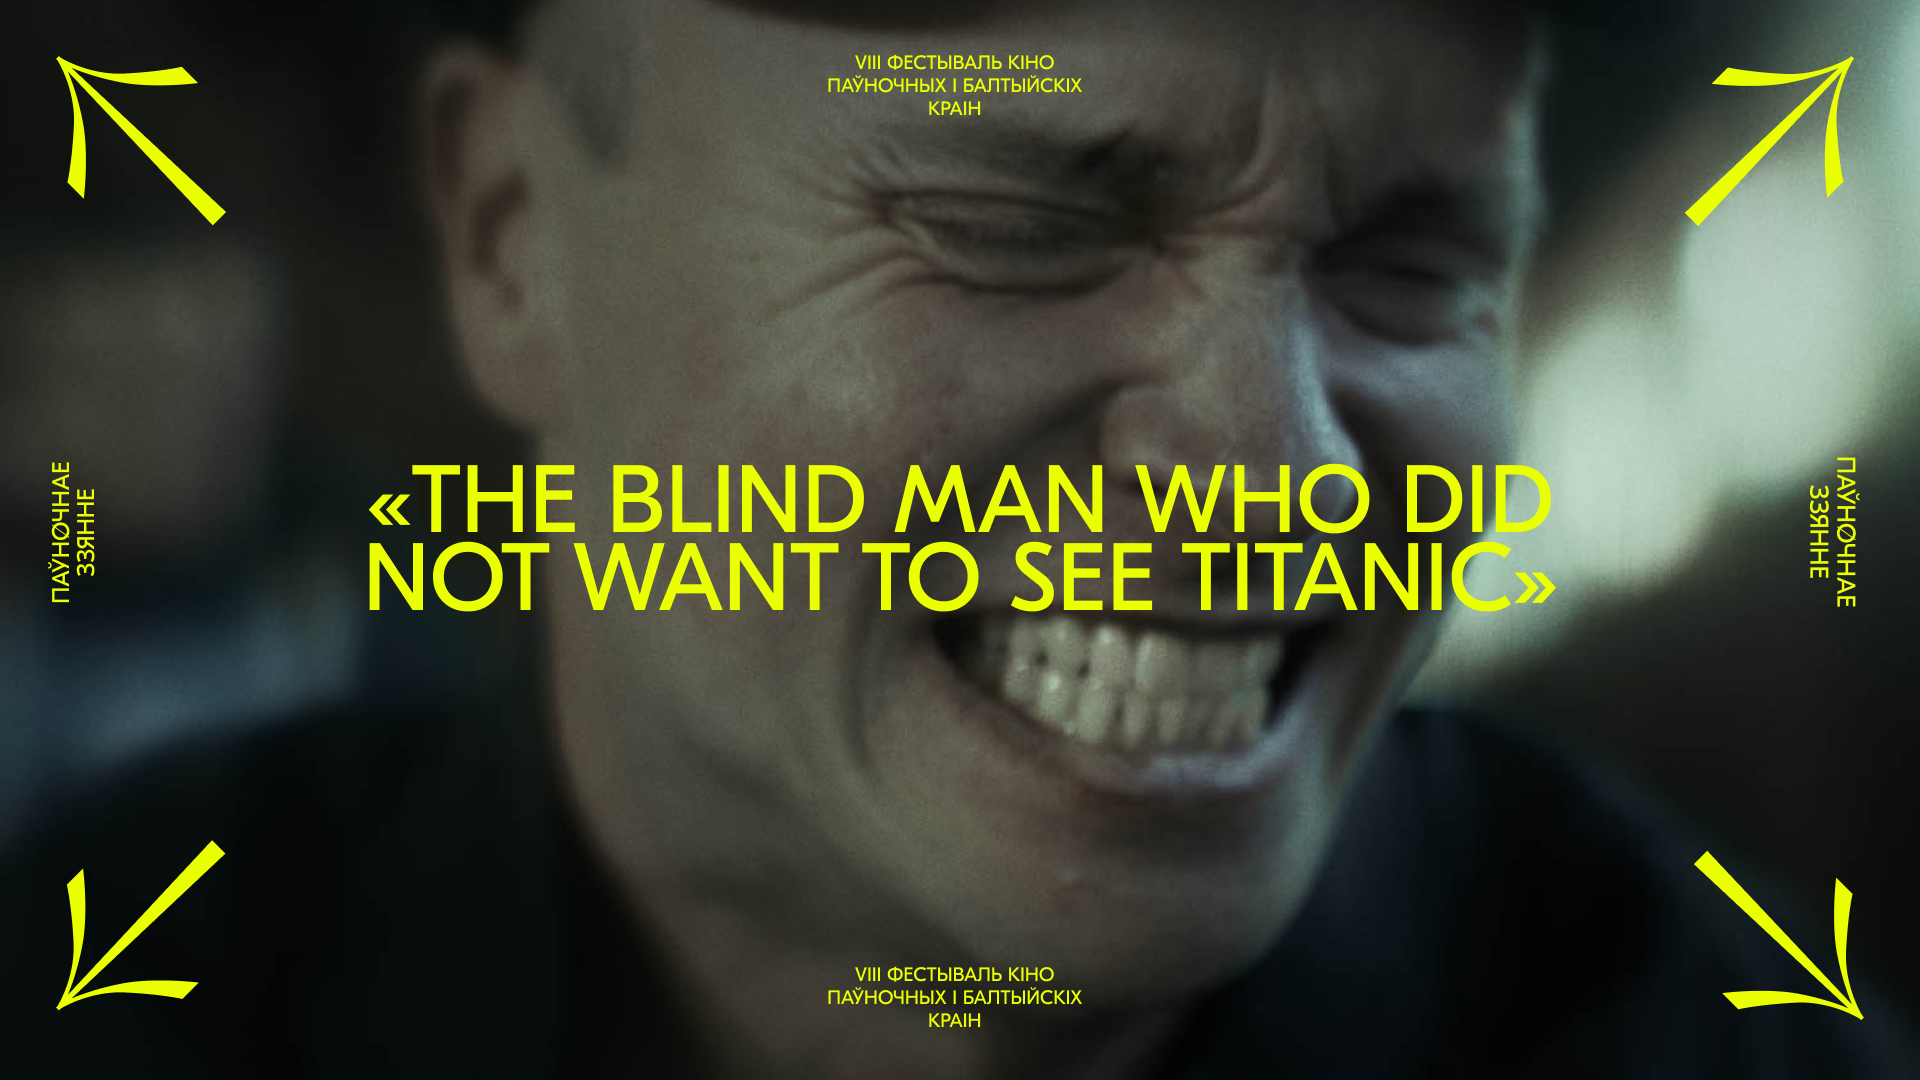 Official US Trailer for 'The Blind Man Who Did Not Want to See Titanic